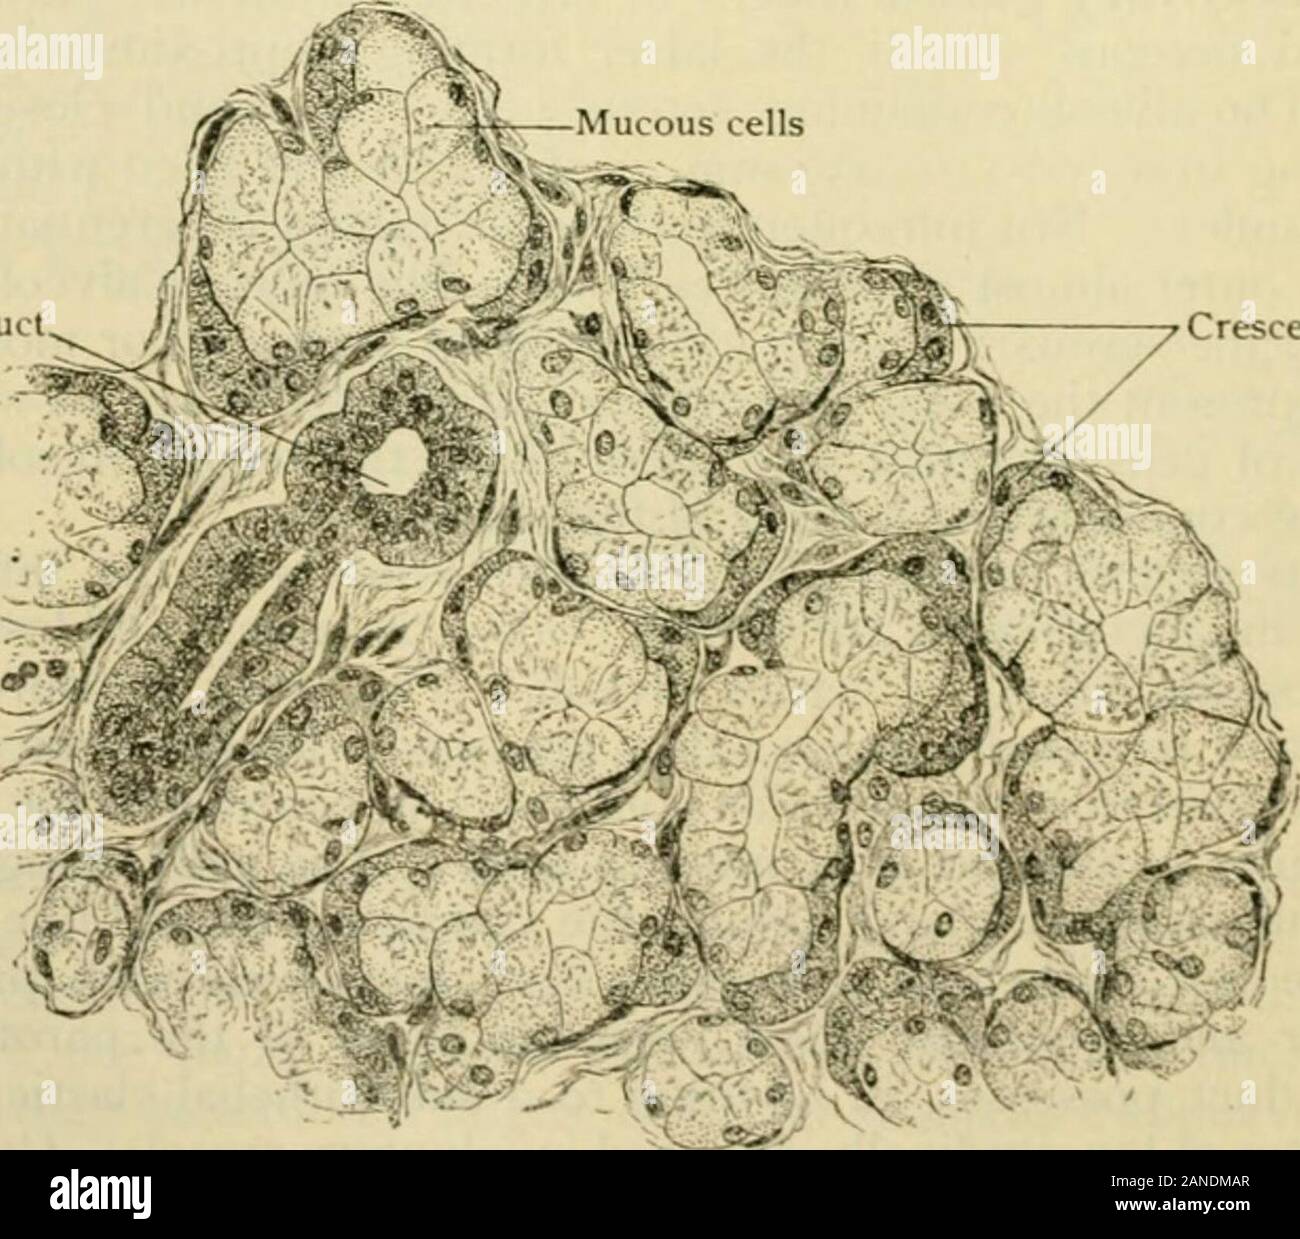 Human anatomy, including structure and development and practical considerations . Serous alveoliSection of submaxillary gland, showing serous and mucous alveoli. X 270. the mucous cells appear, at first isolated or in groups, increasing in numbers untilthey form the entire lining of the passage and become the secreting elements occupy-ing the tubular alveoli of the gland. The latter vary from .030-.060 mm. in diam-eter, and are clothed with cells averaging .015 mm. high. The condition of the Fig. 1349. Duct. Crescents of serous cells •-J^i-i^ Section of sublingual gland, showing serous cells g Stock Photo